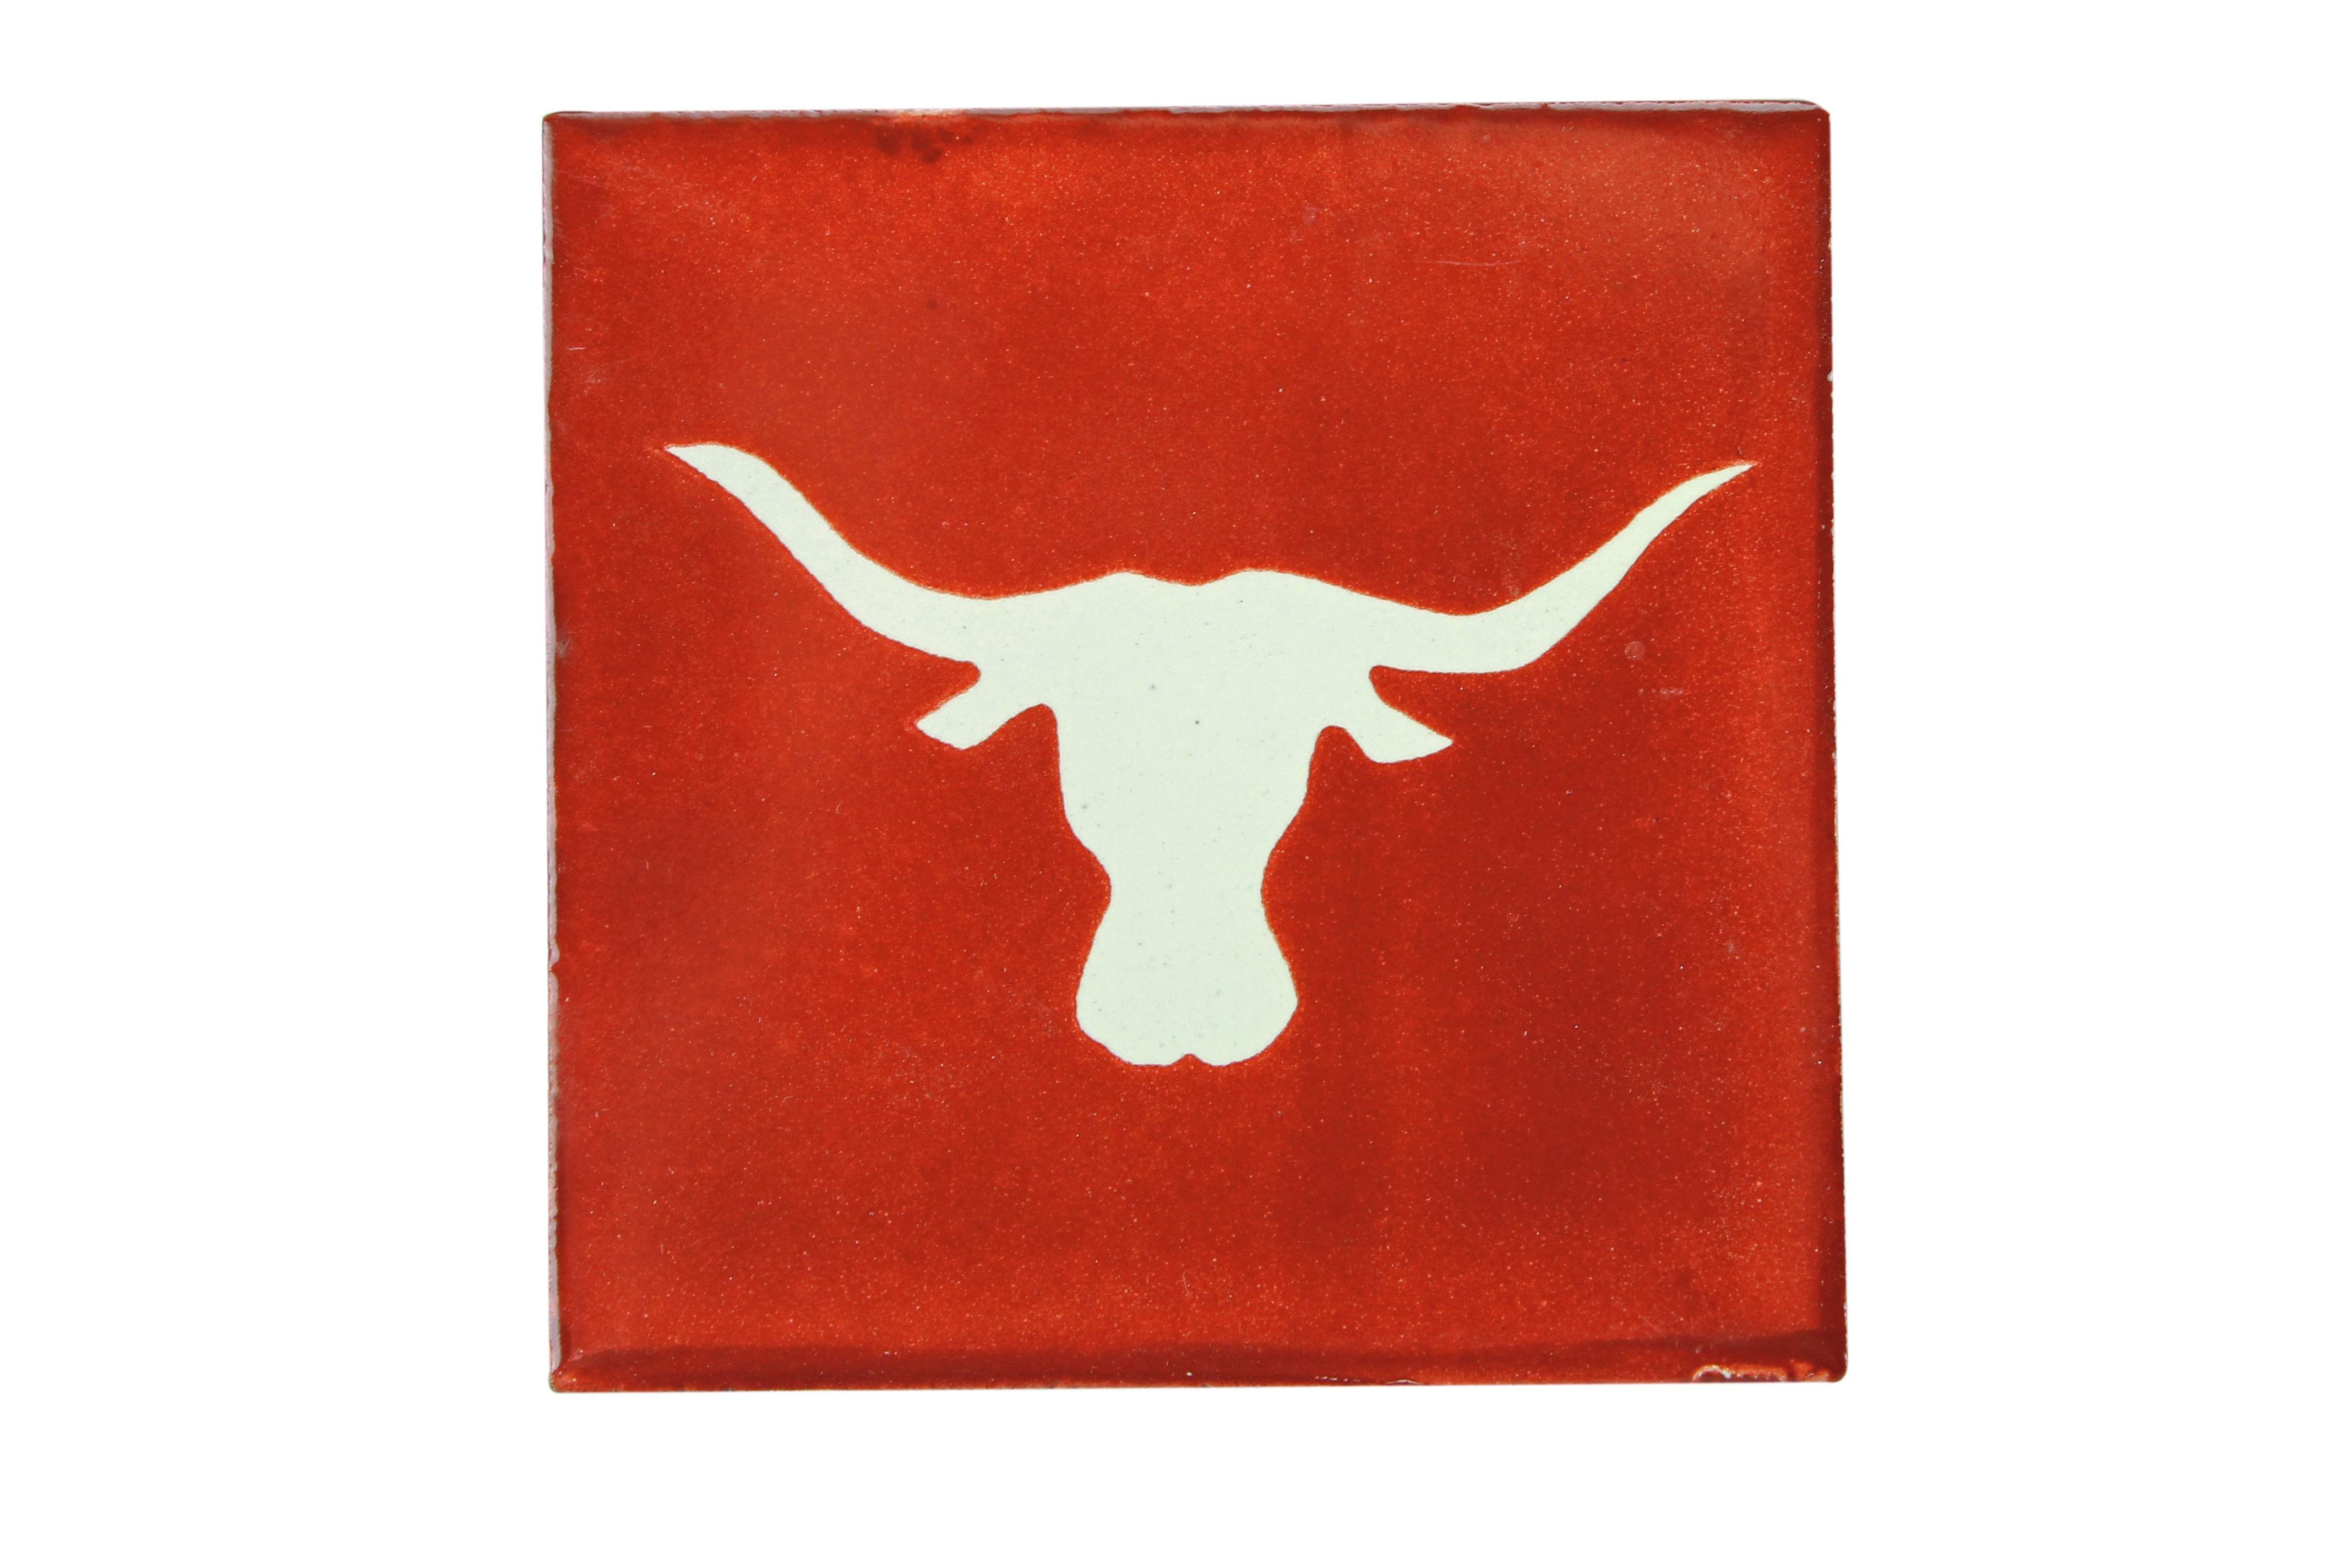 Bull with Horns Skull Ceramic Tile | Tres Amigos World Imports